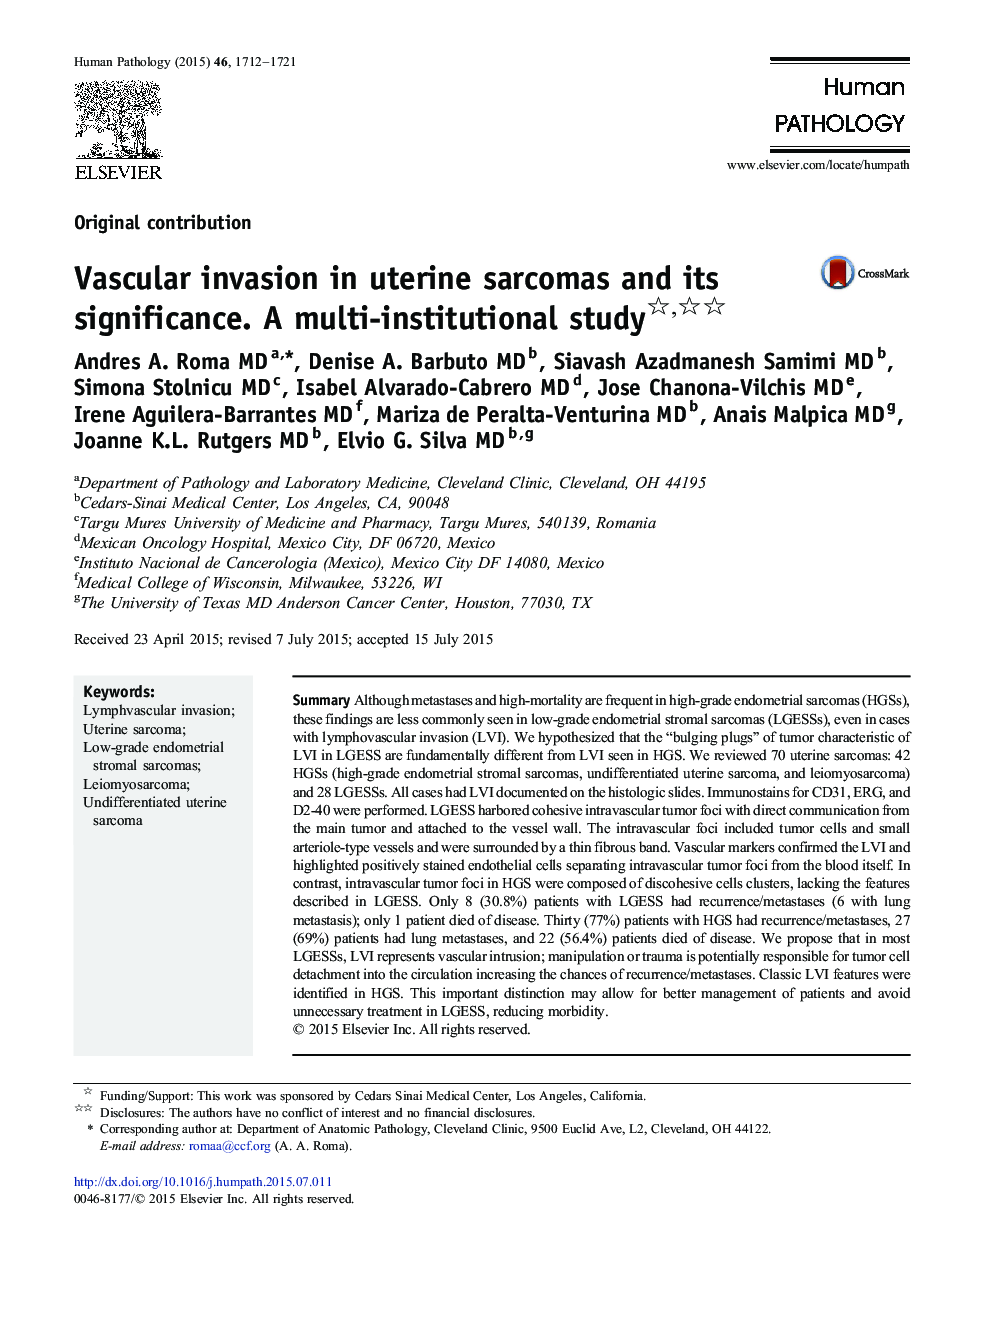 Vascular invasion in uterine sarcomas and its significance. A multi-institutional study 